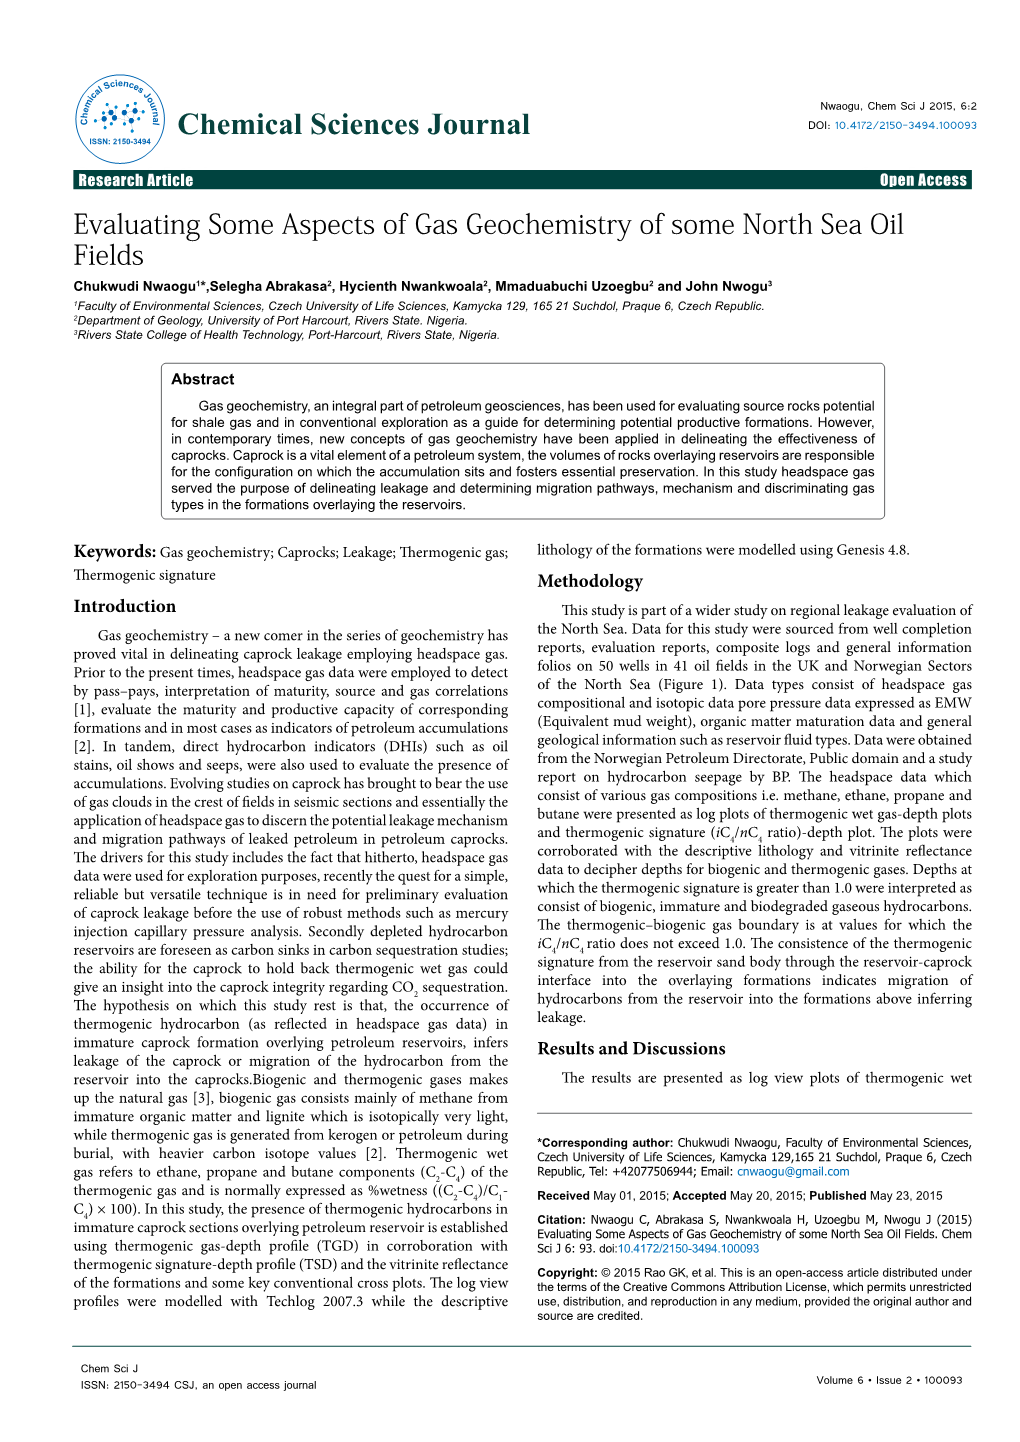 Evaluating Some Aspects of Gas Geochemistry of Some North Sea Oil Fields